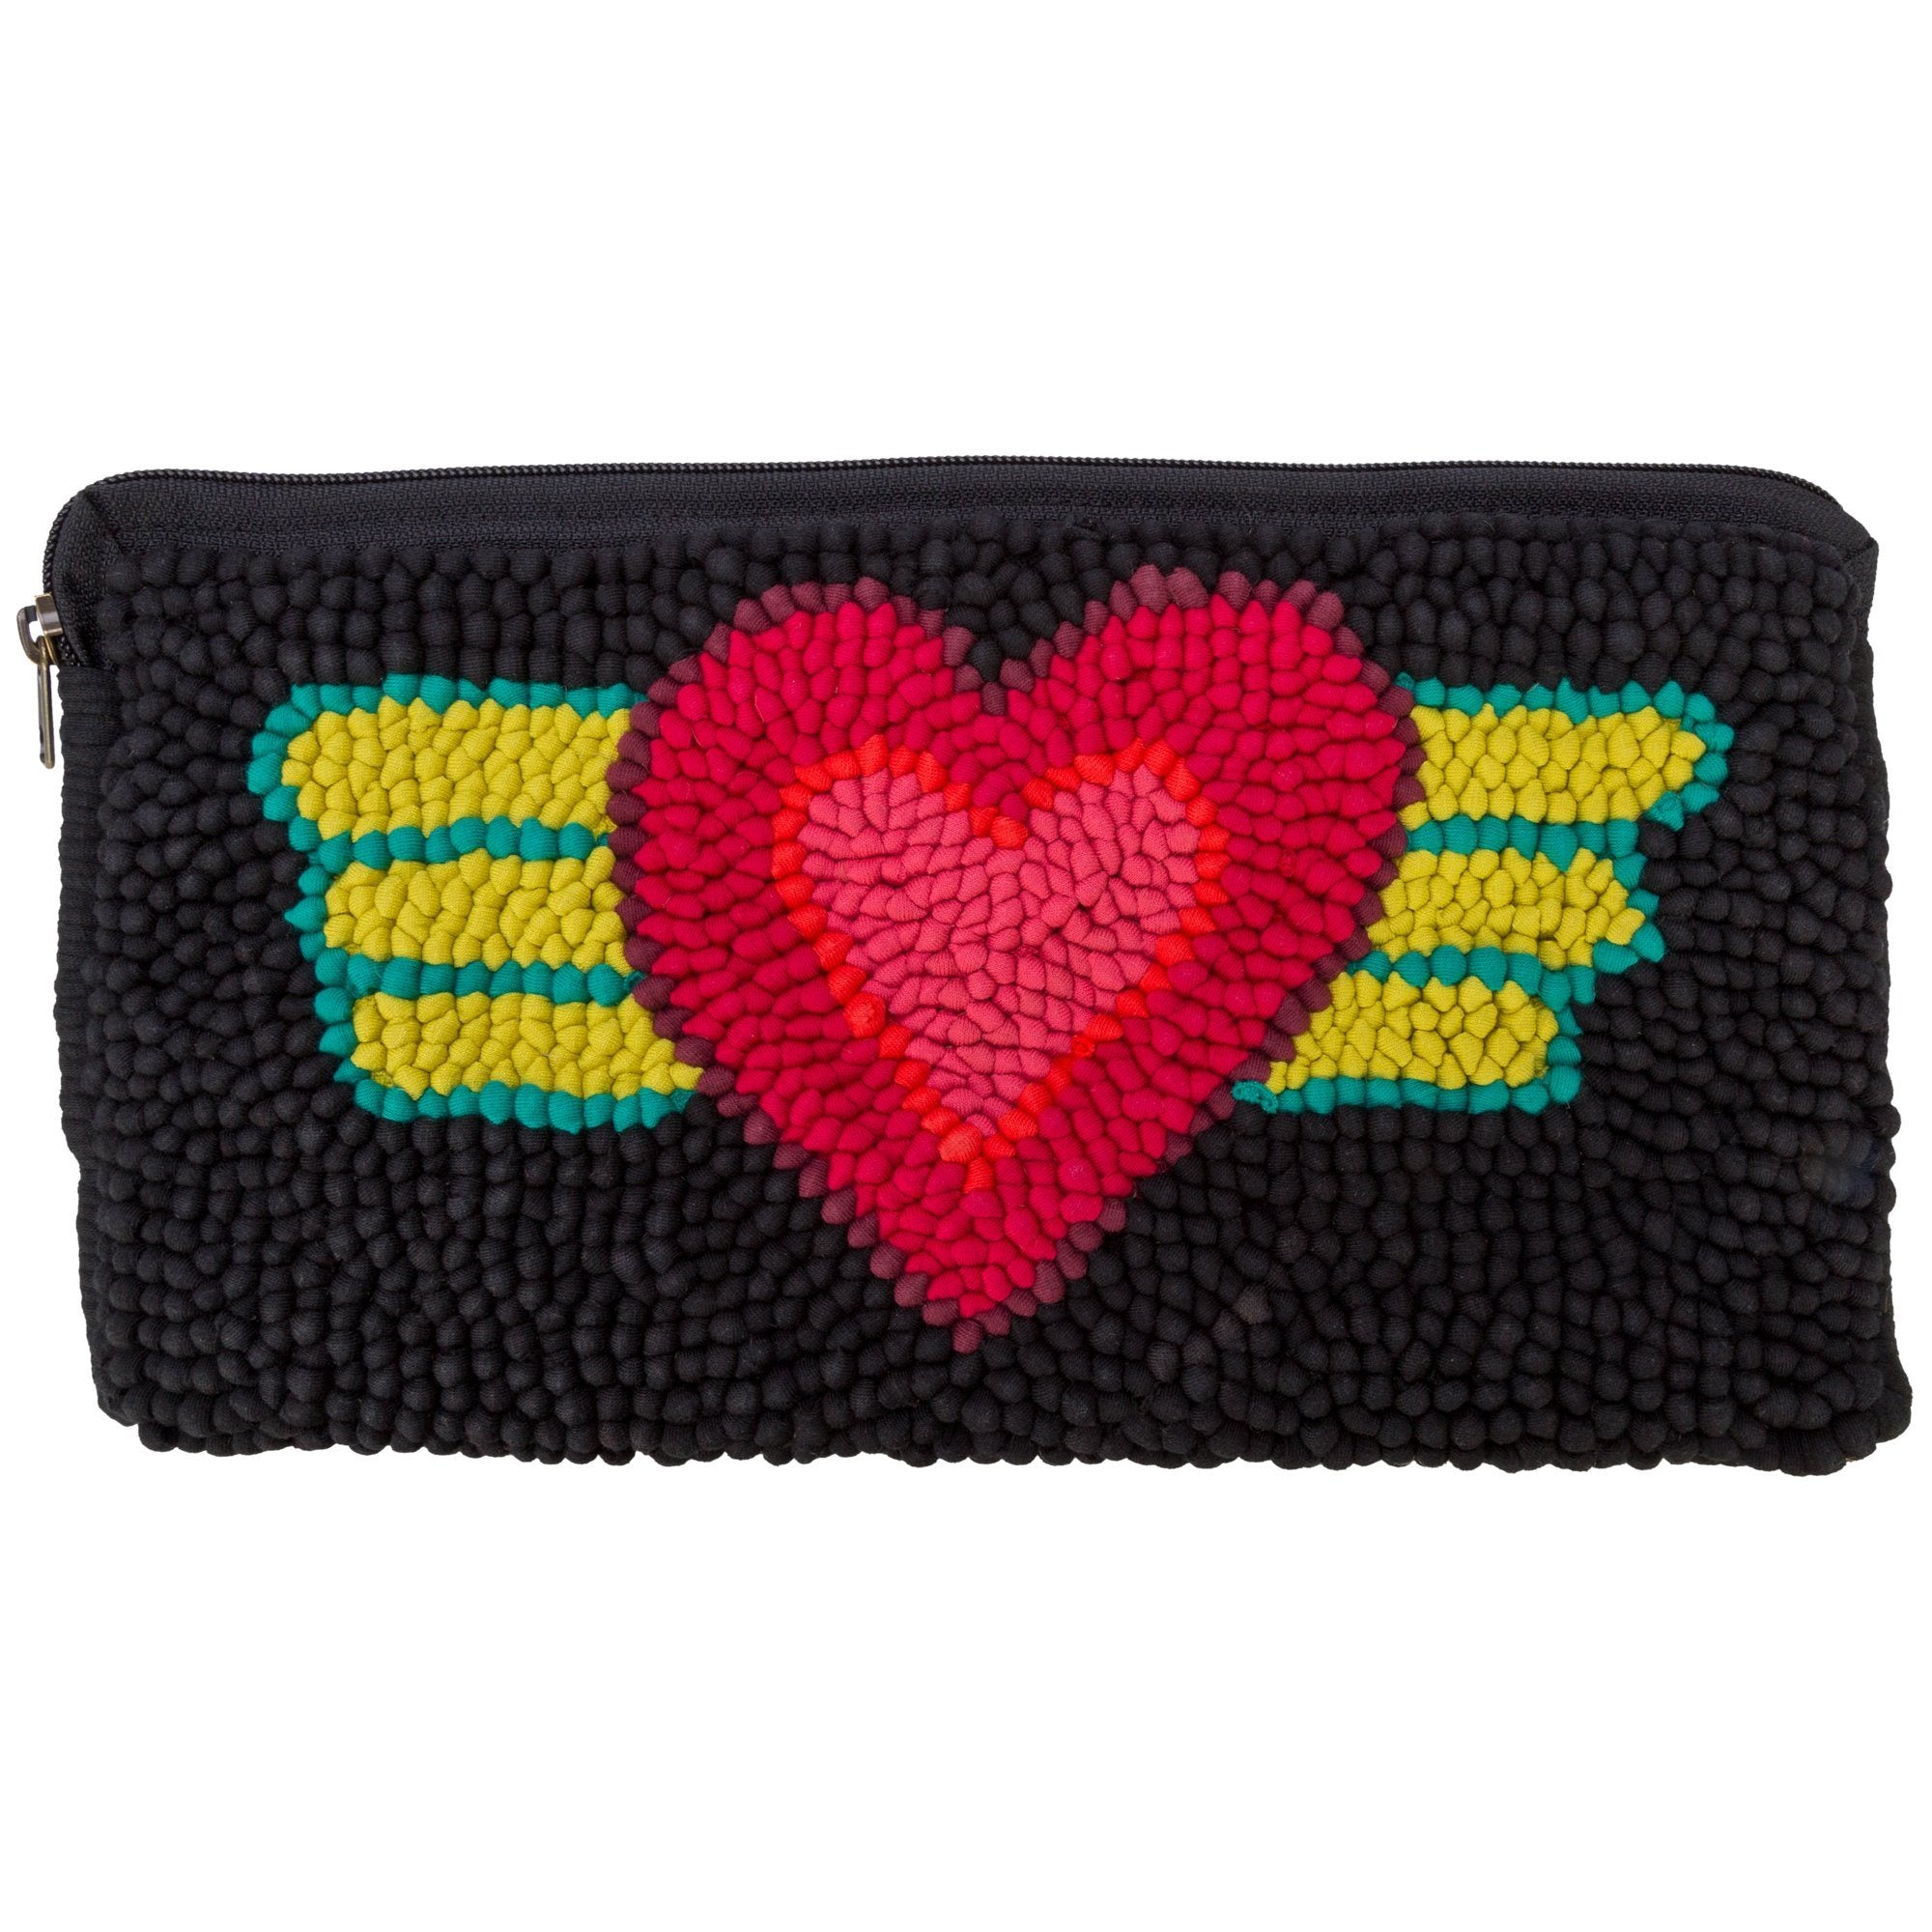 Mielie Grand Clutch - Flying Heart - Black